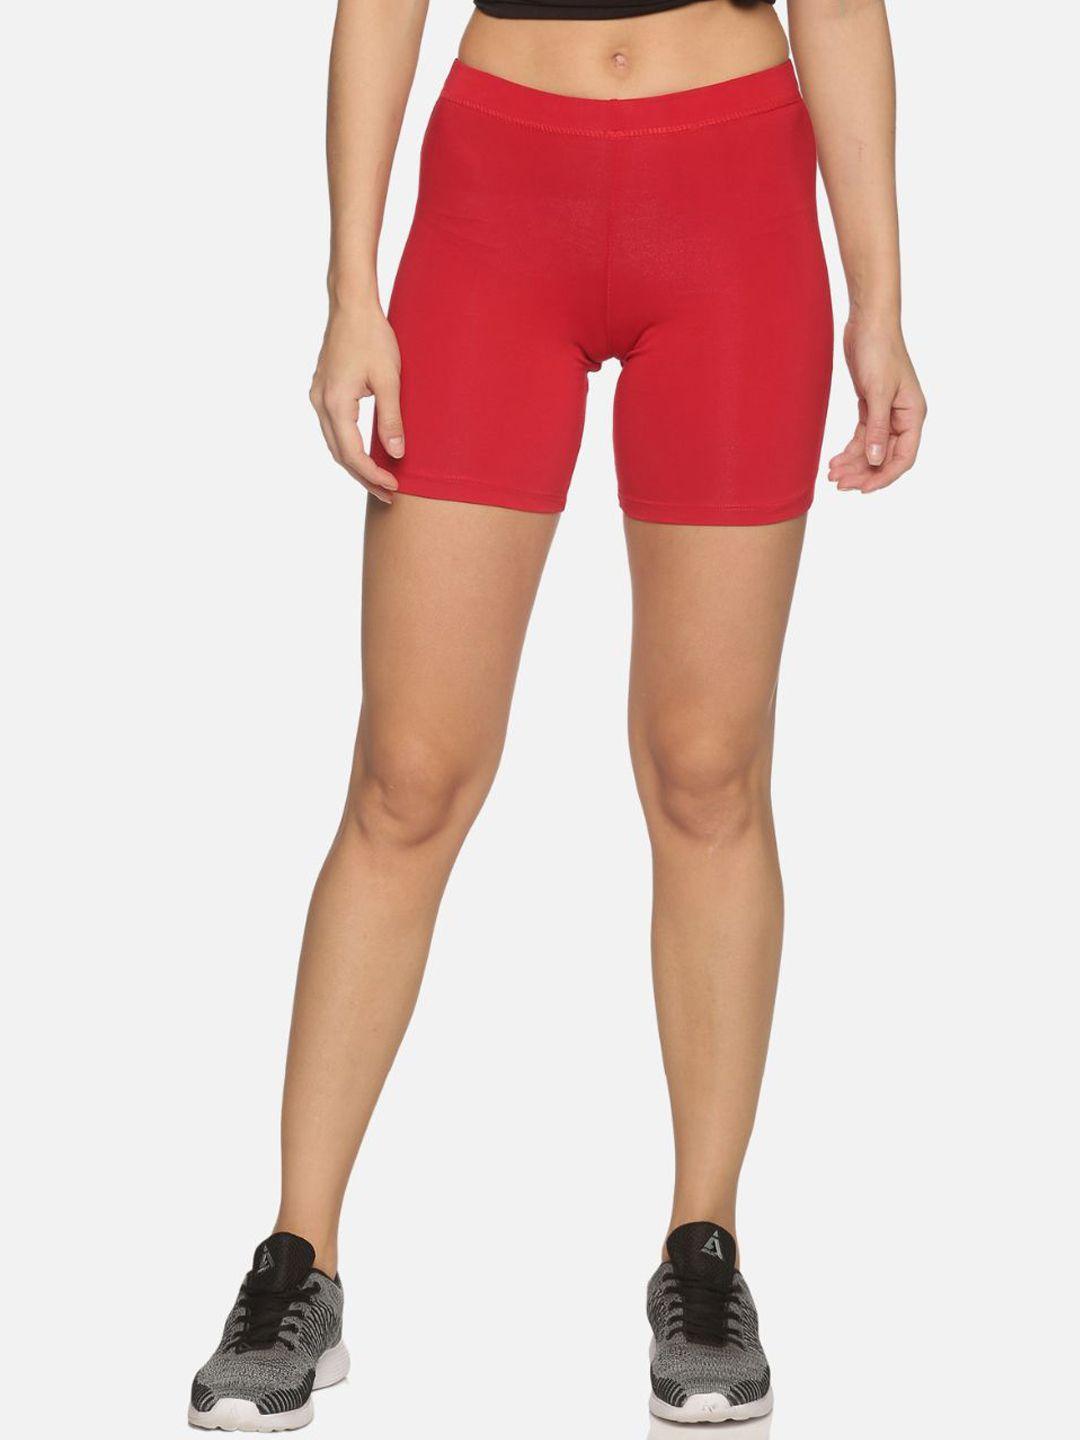 outflits women red skinny fit cycling sports shorts